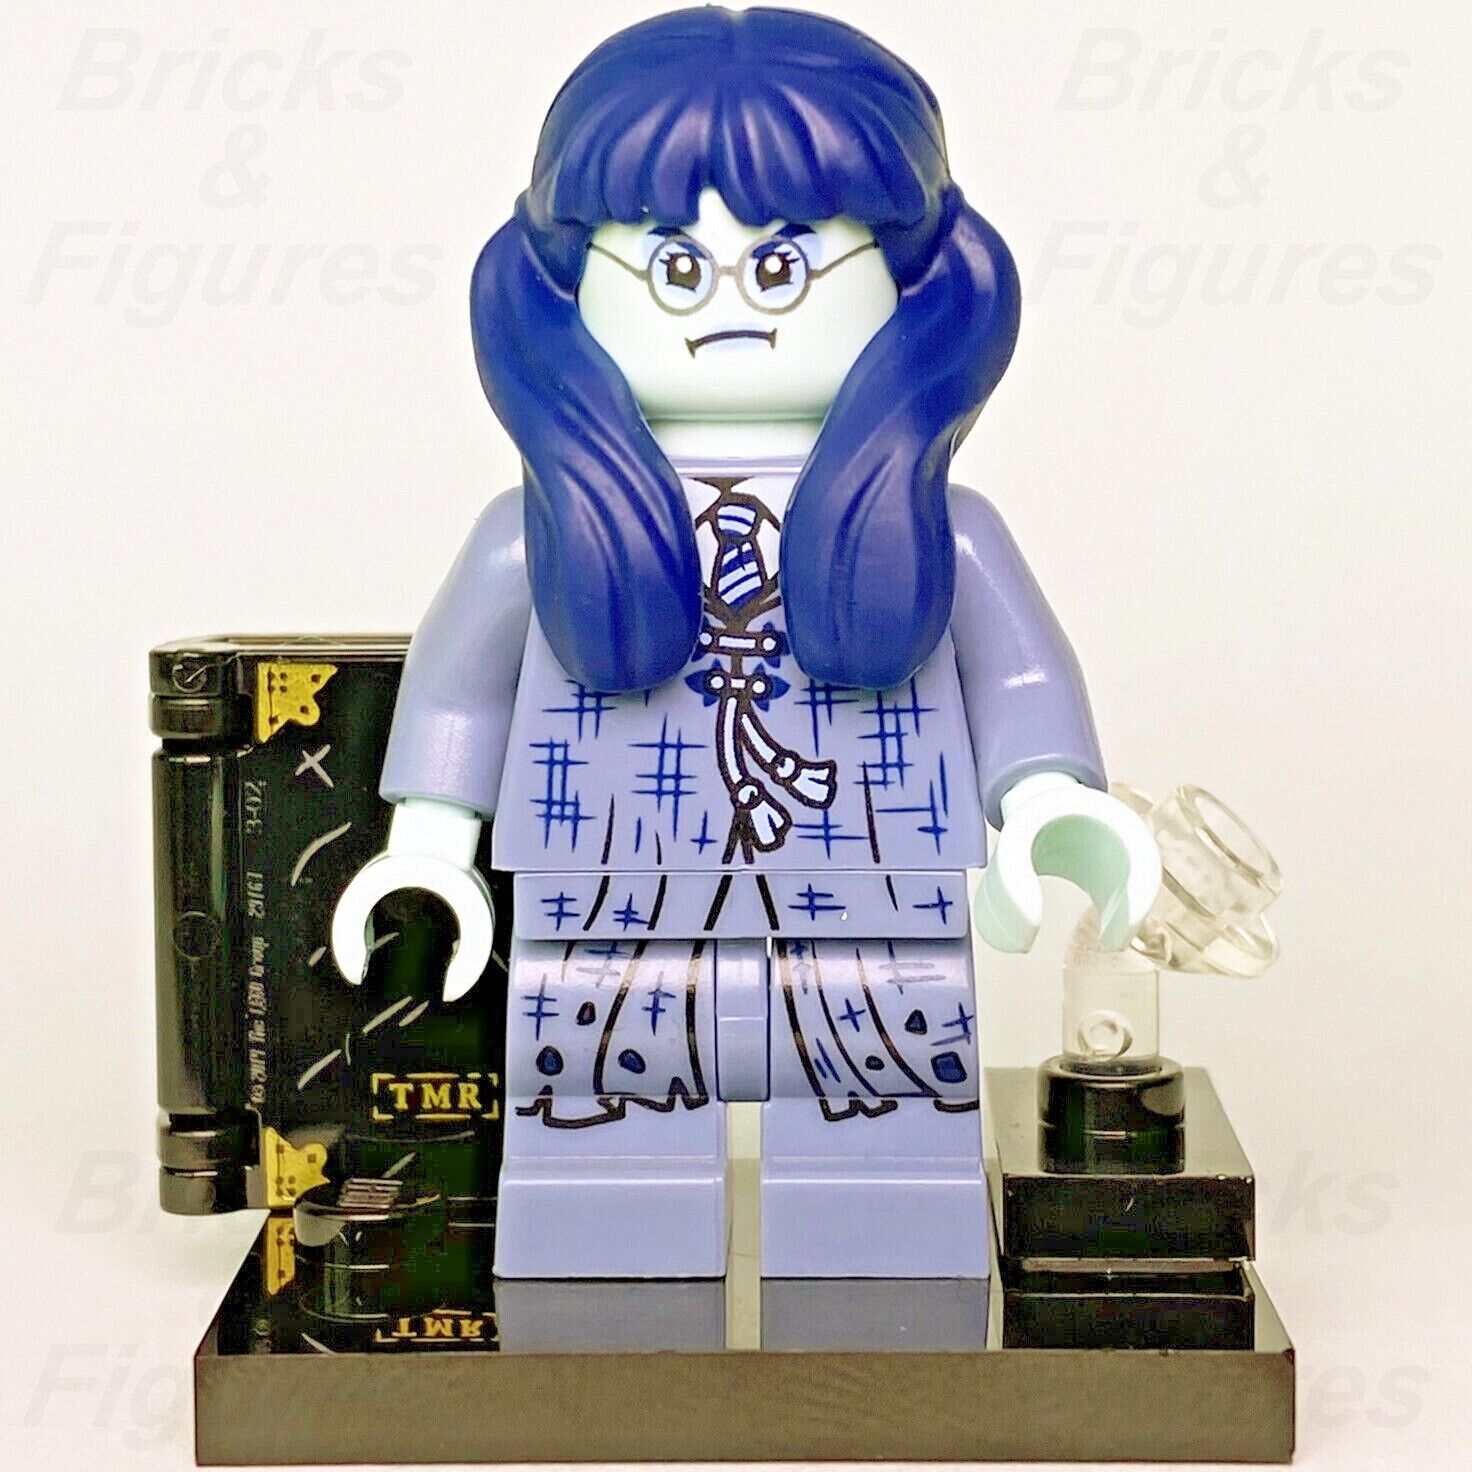 Harry Potter LEGO Moaning Myrtle Collectible Minifigures Series 2 71028 Ghost - Bricks & Figures